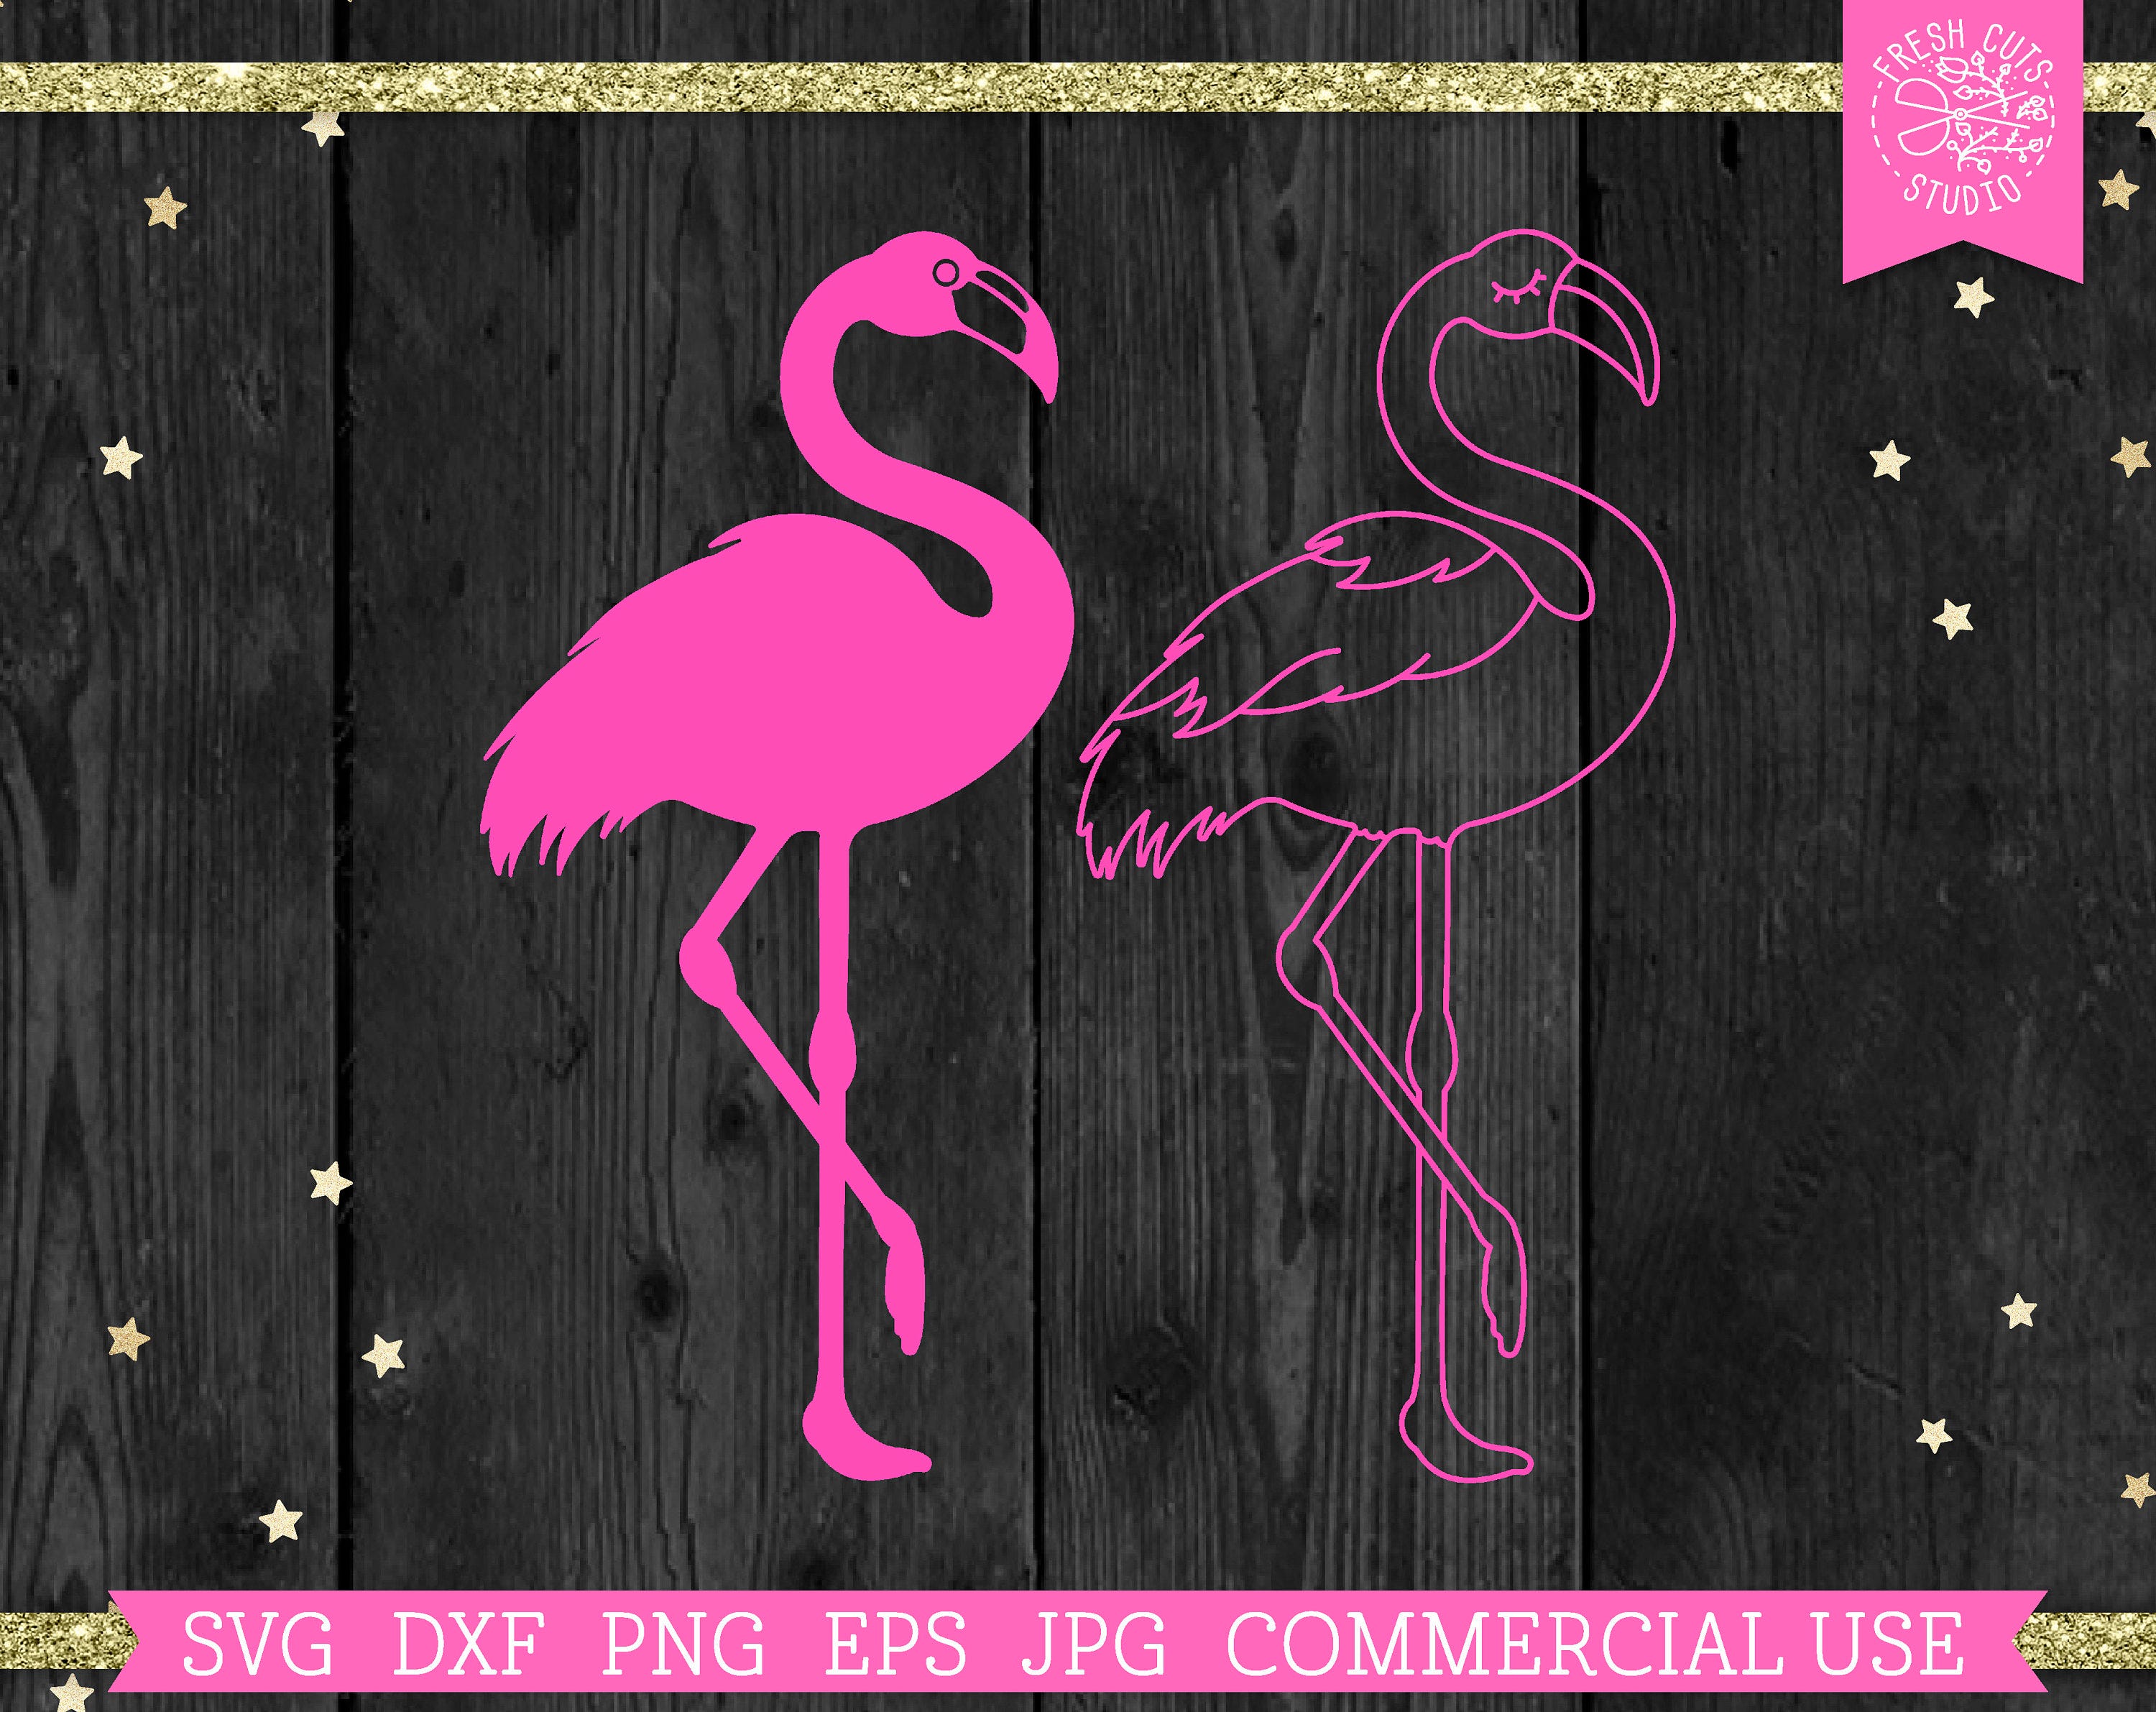 Flamingo Silhouette SVG Cut File for Cricut, Flamingo Line Drawing Clipart, Commercial Use svg, Tropical Beach Vacation, Vector, dxf png eps